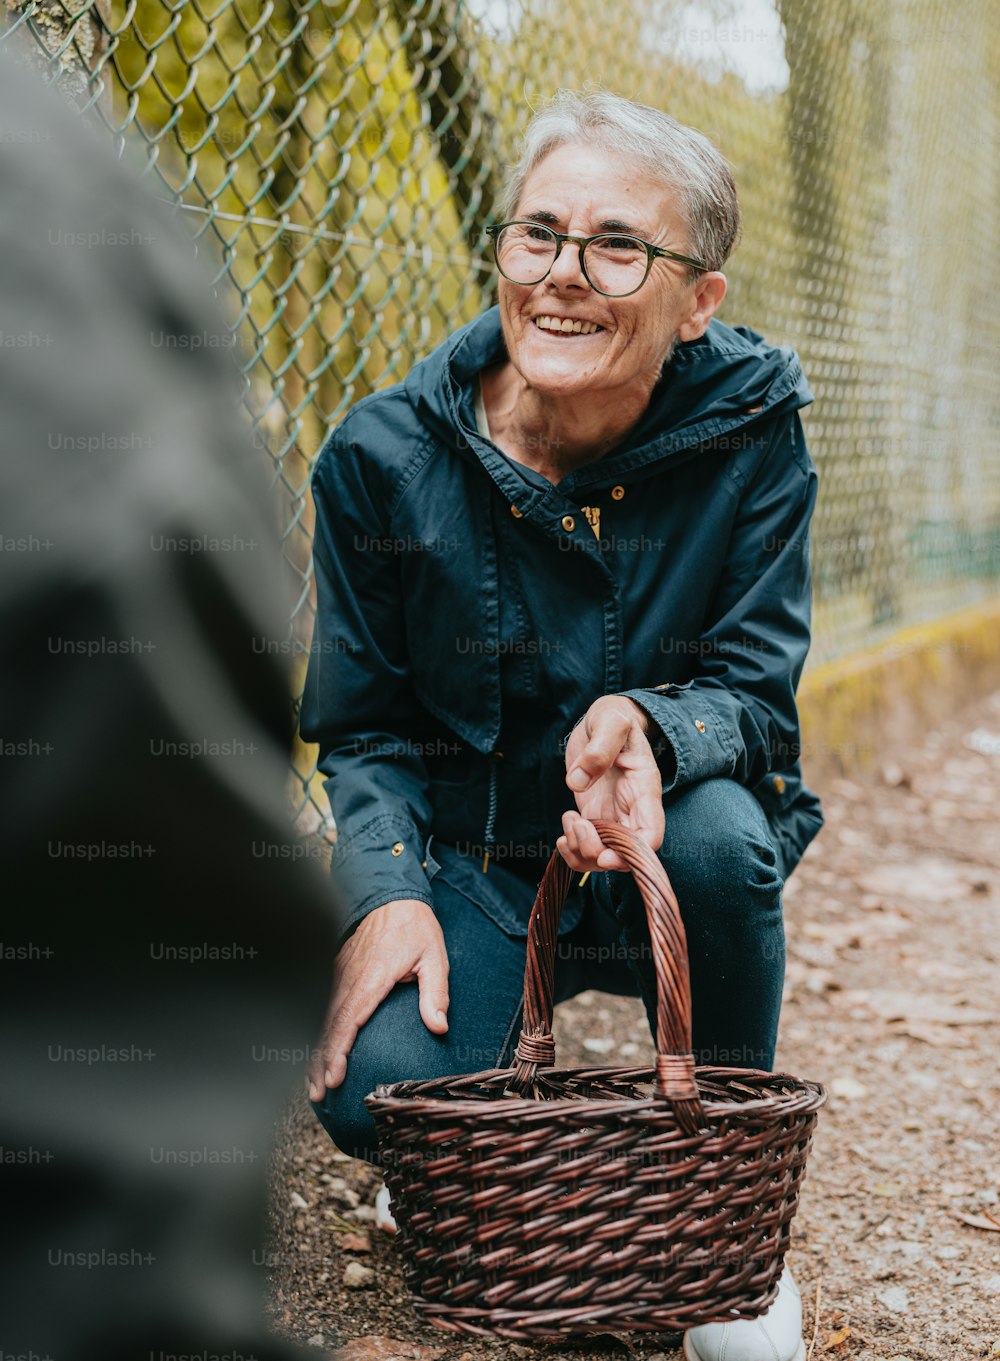 a man sitting on the ground holding a basket